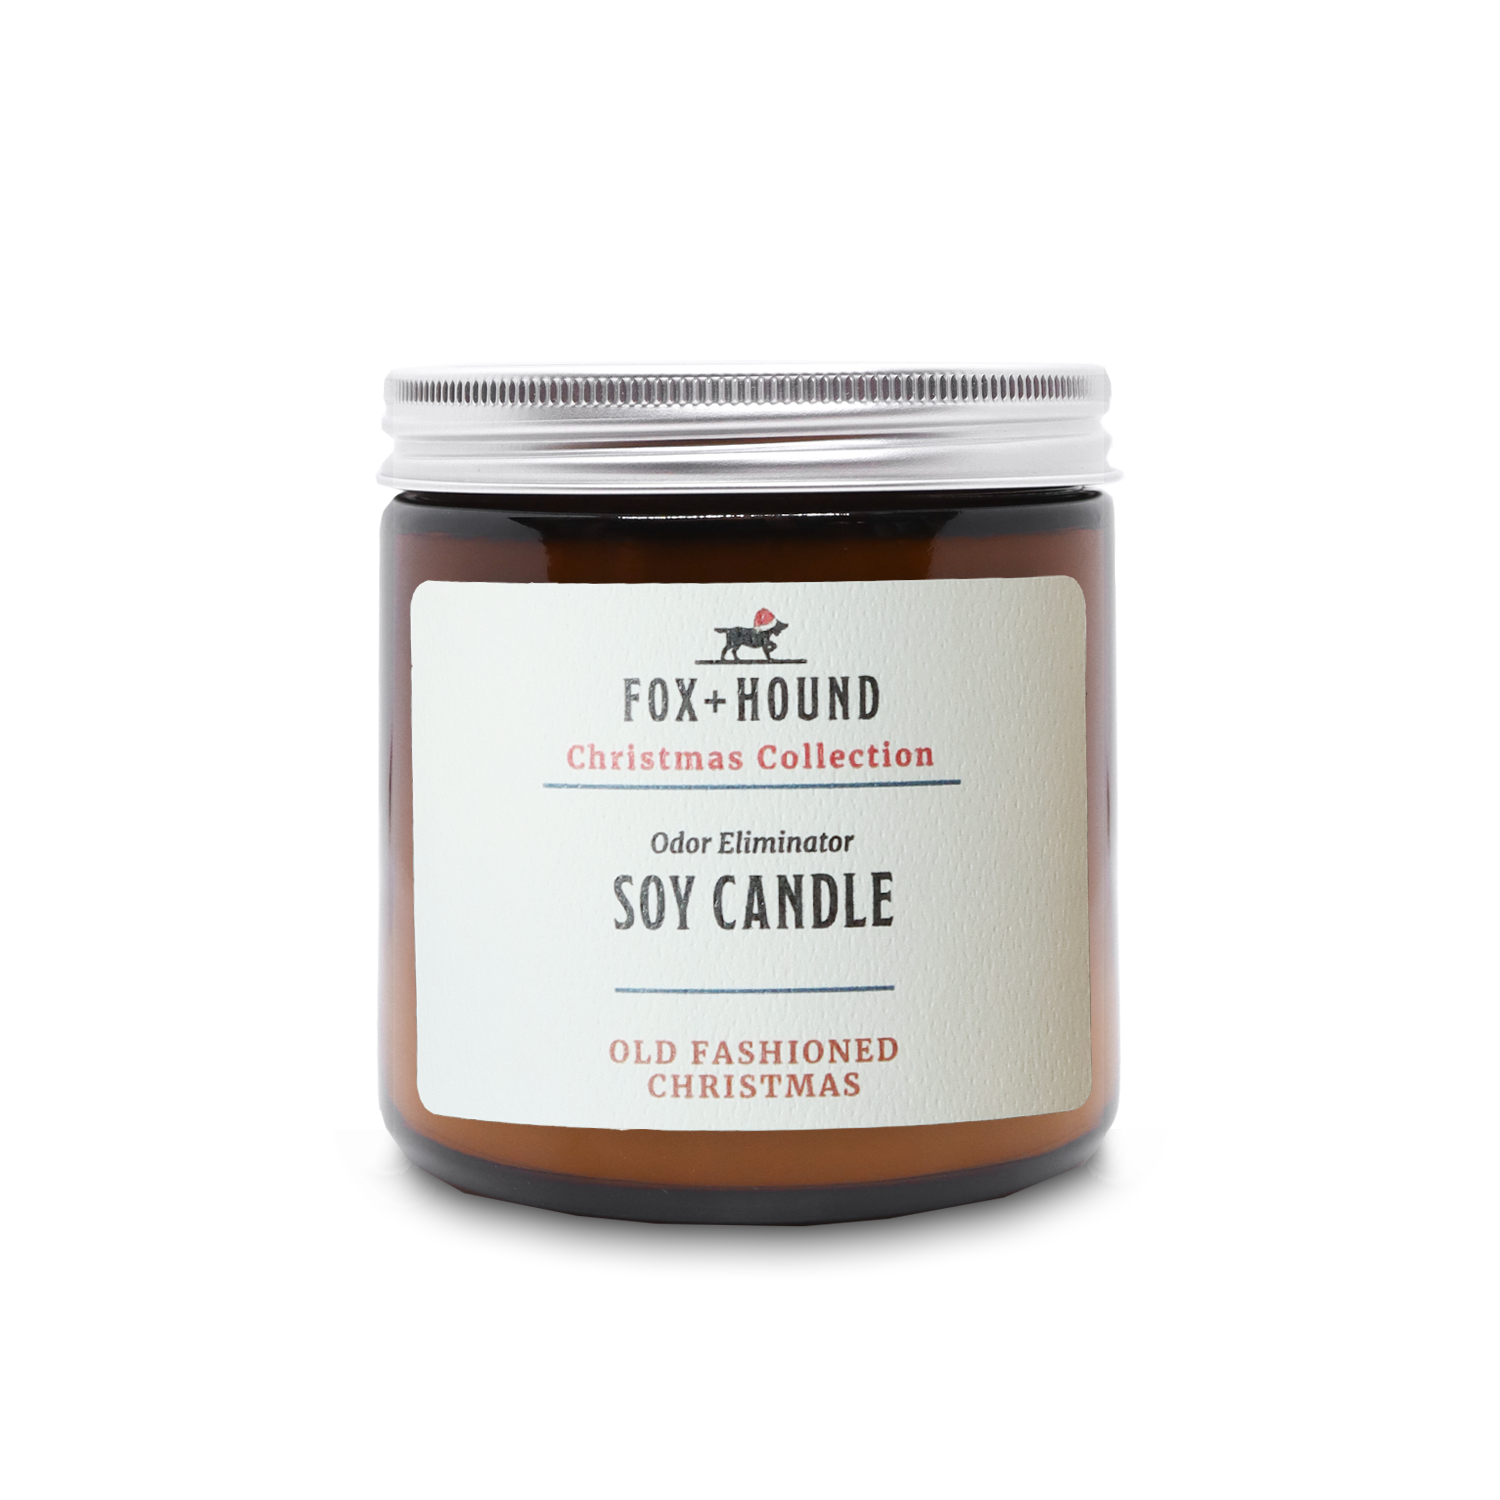 Odor-Eliminator Soy Candle - Old Fashioned Christmas